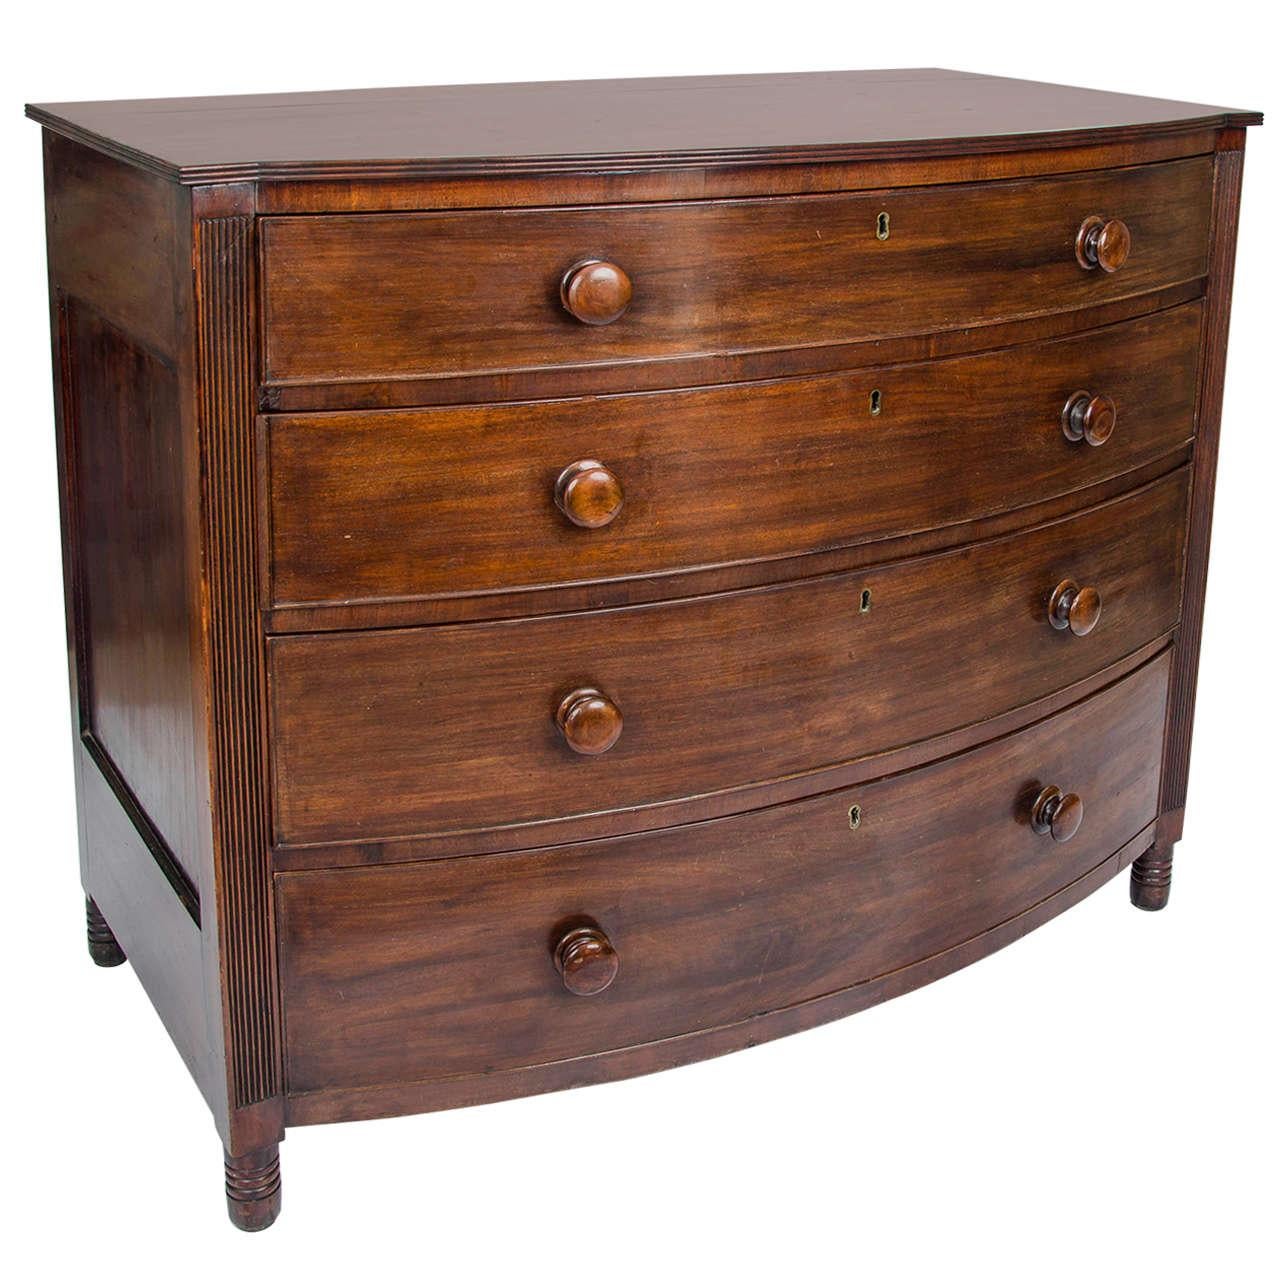 Georgian Regency Period Bow Fronted Chest with Reeded Detail, English circa 1825 For Sale